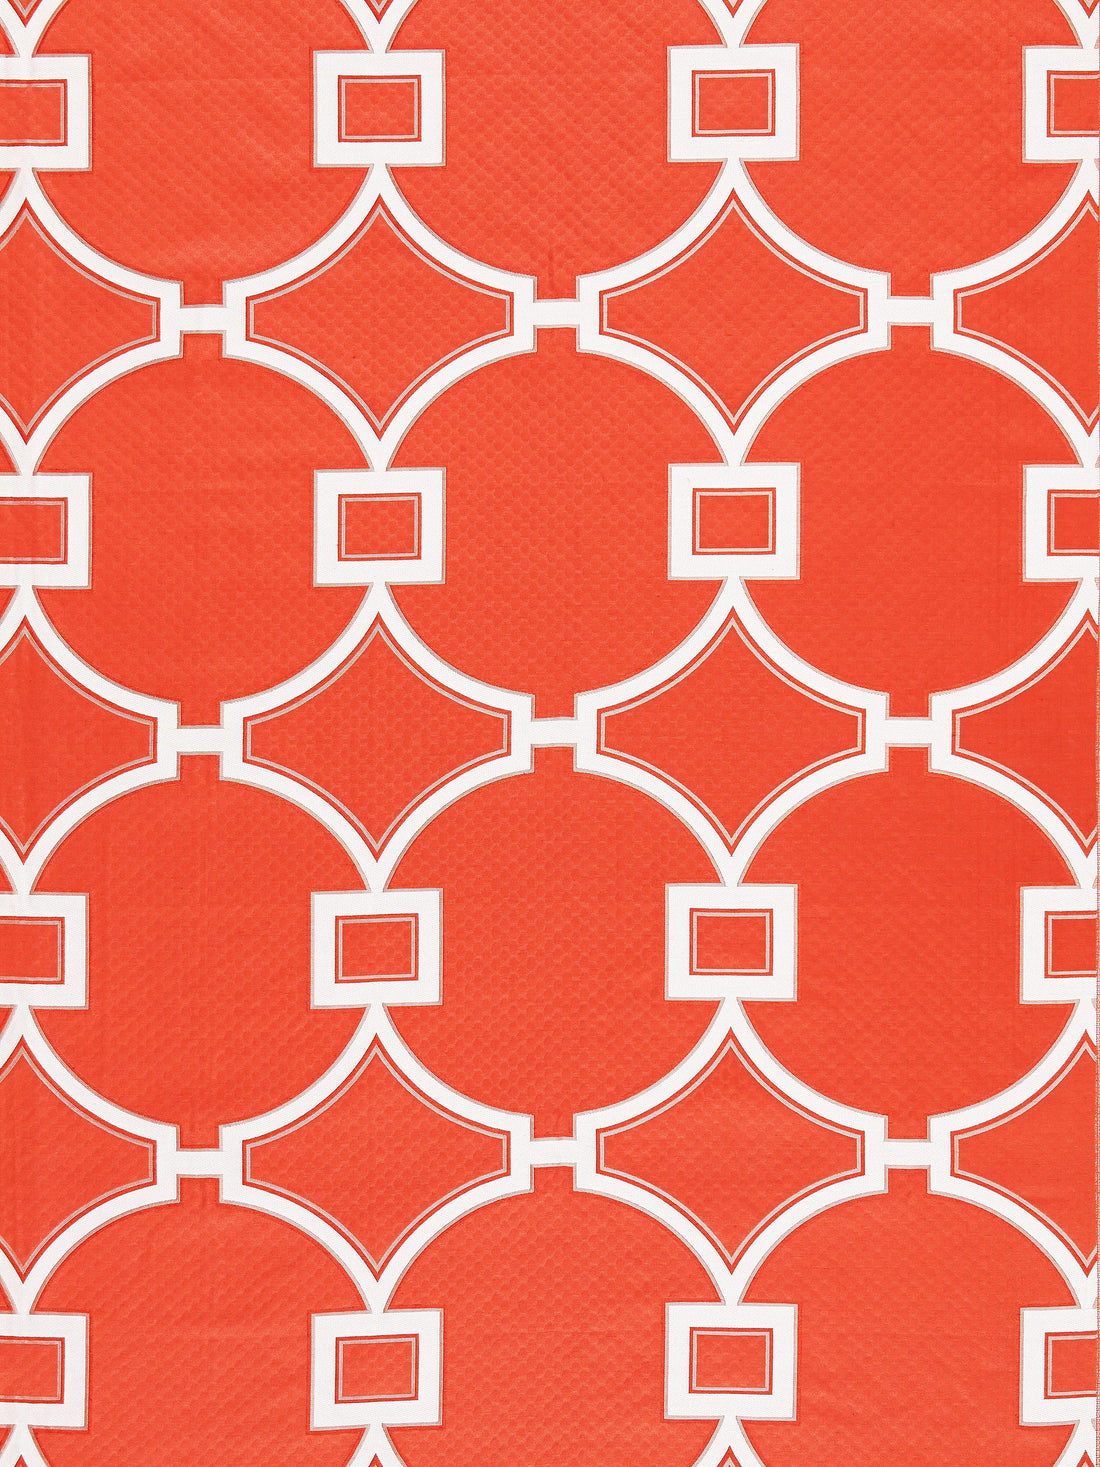 Circle Fret fabric in coral color - pattern number SC 000327072 - by Scalamandre in the Scalamandre Fabrics Book 1 collection